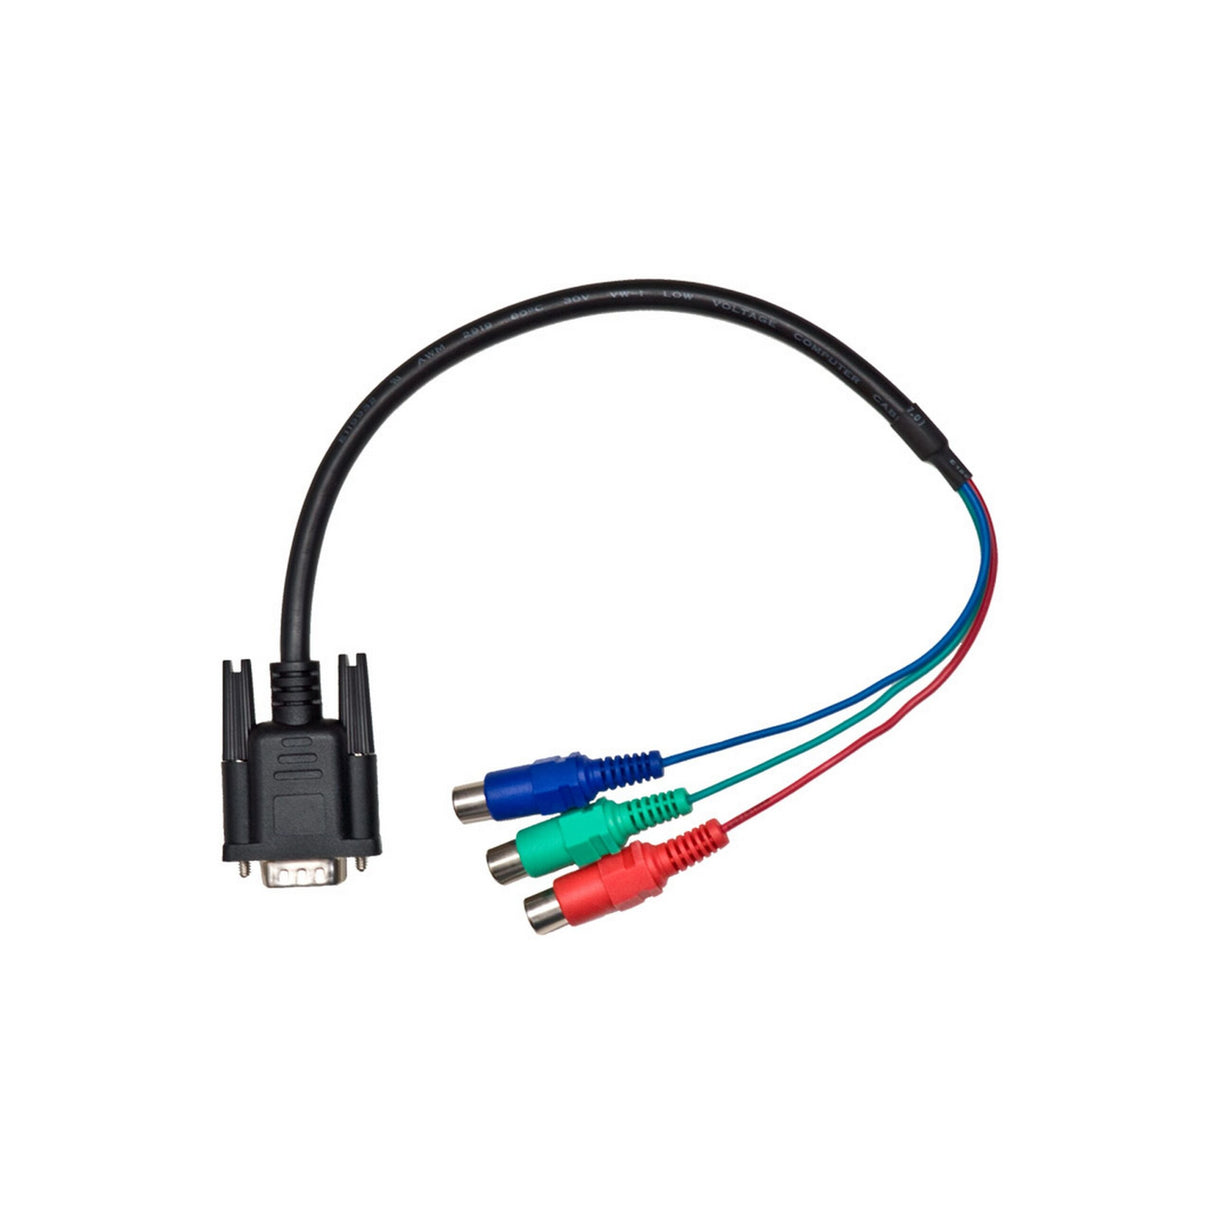 Intelix FLX-RBOCA Component Video to VGA Adaptor Cable for FLX-RI4 Cards